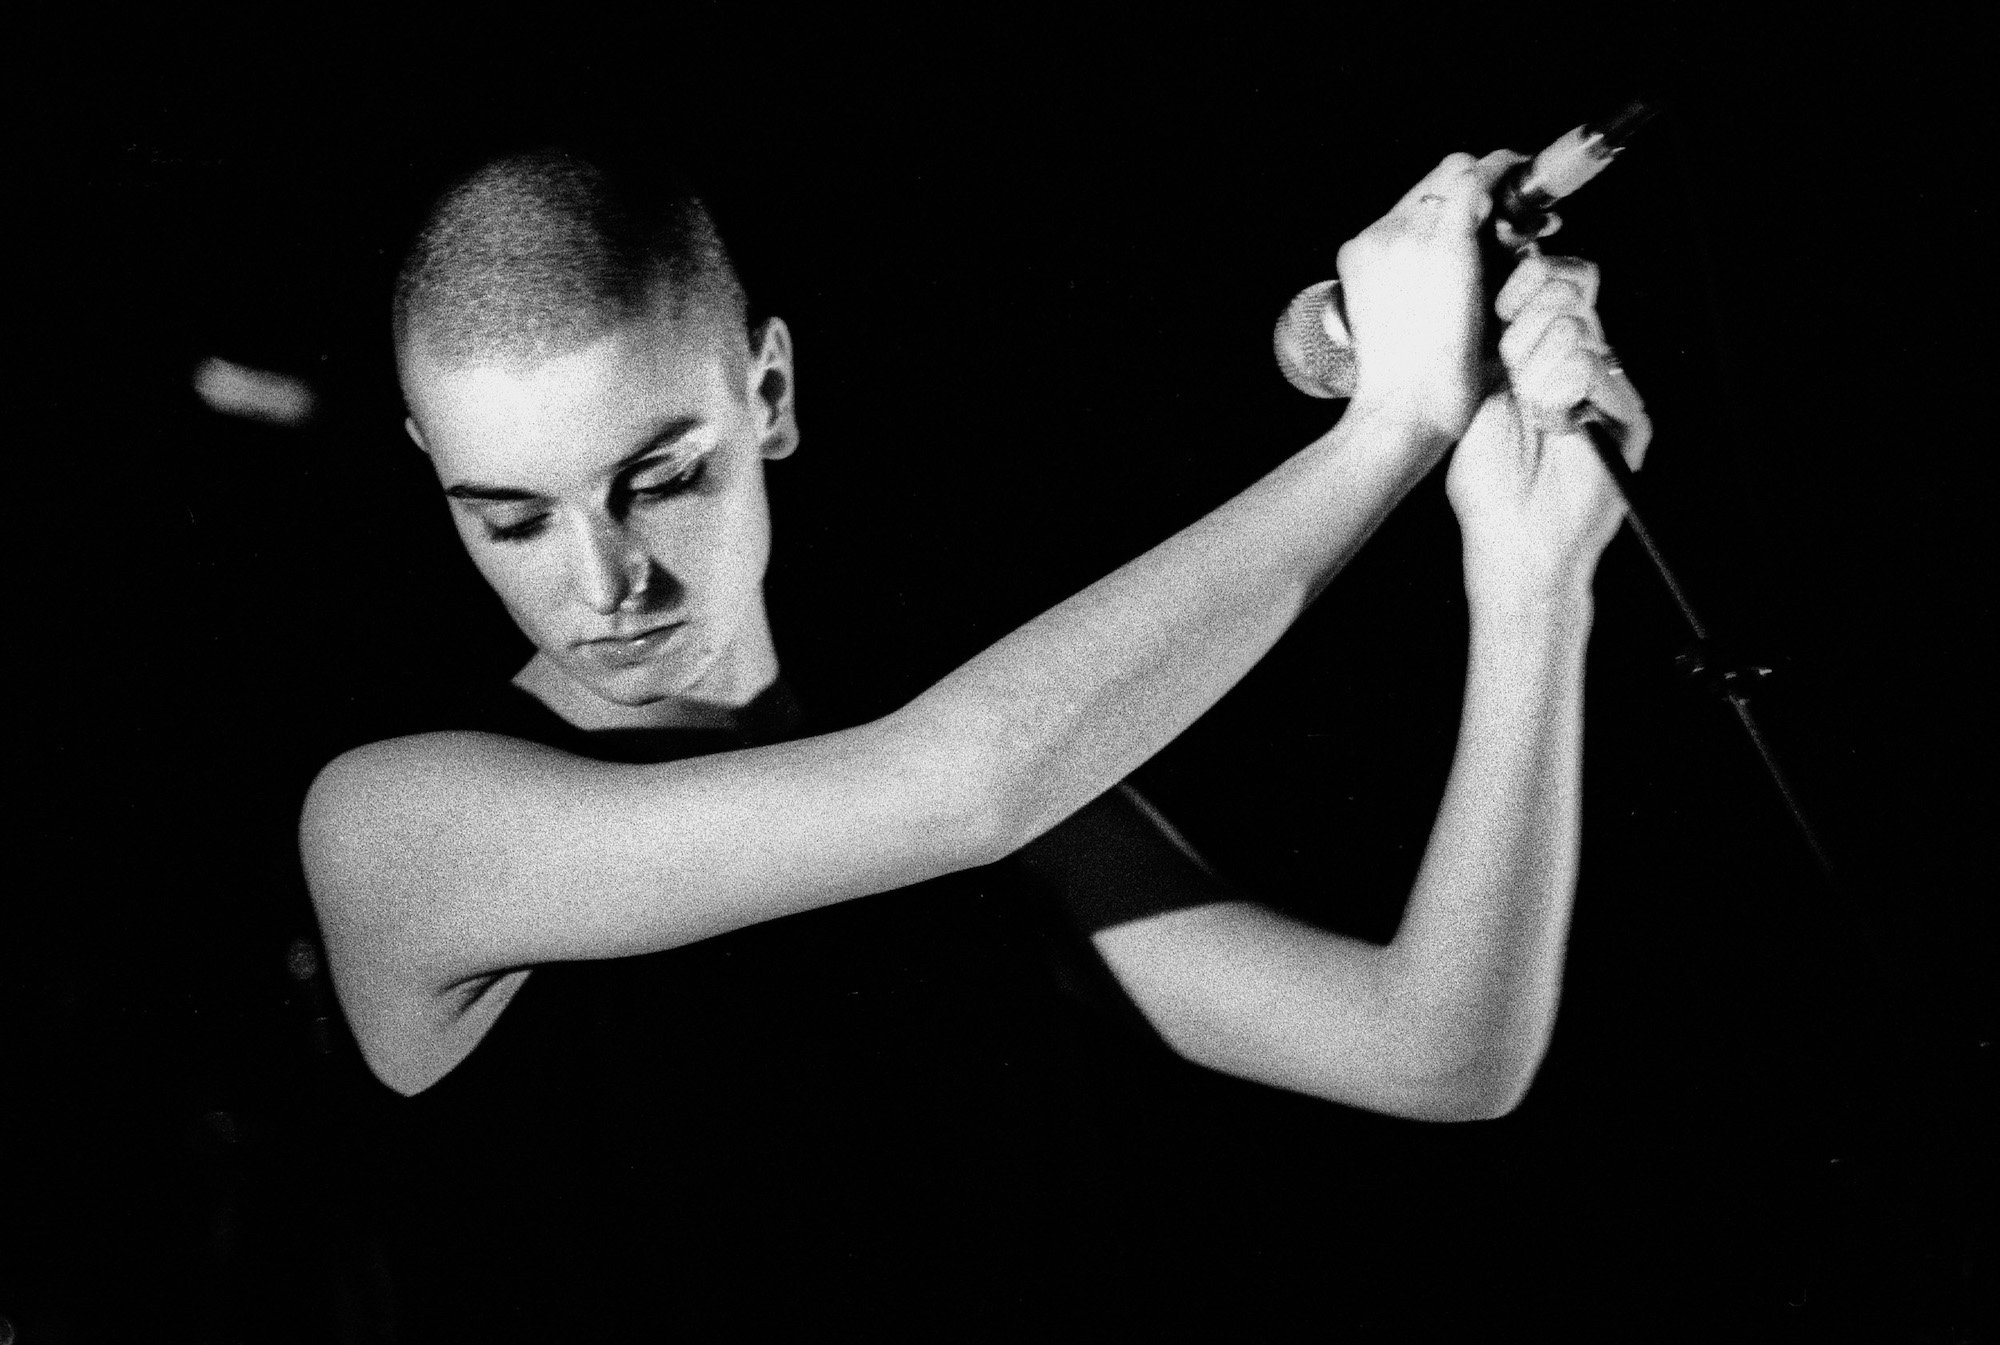 Sinead O'Connor looking down, holding a microphone, in black and white